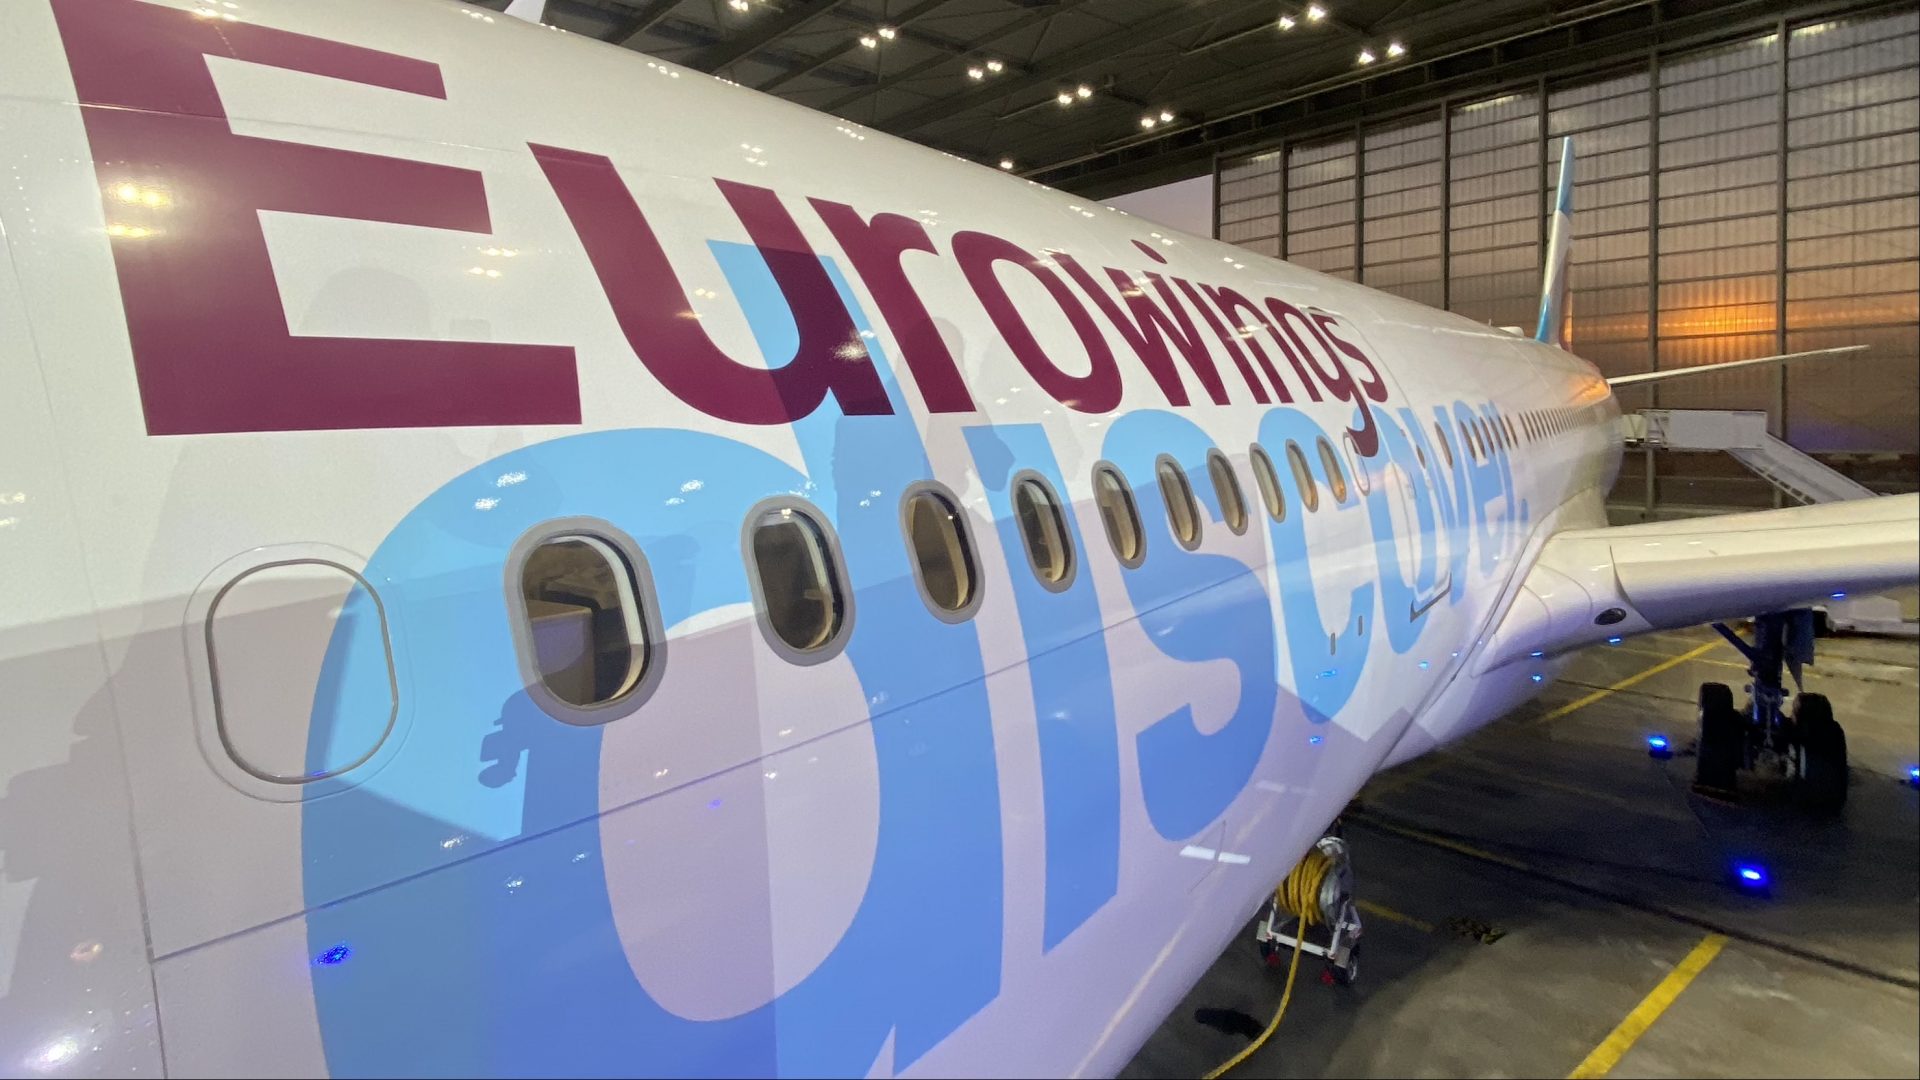 Eurowings Discover36